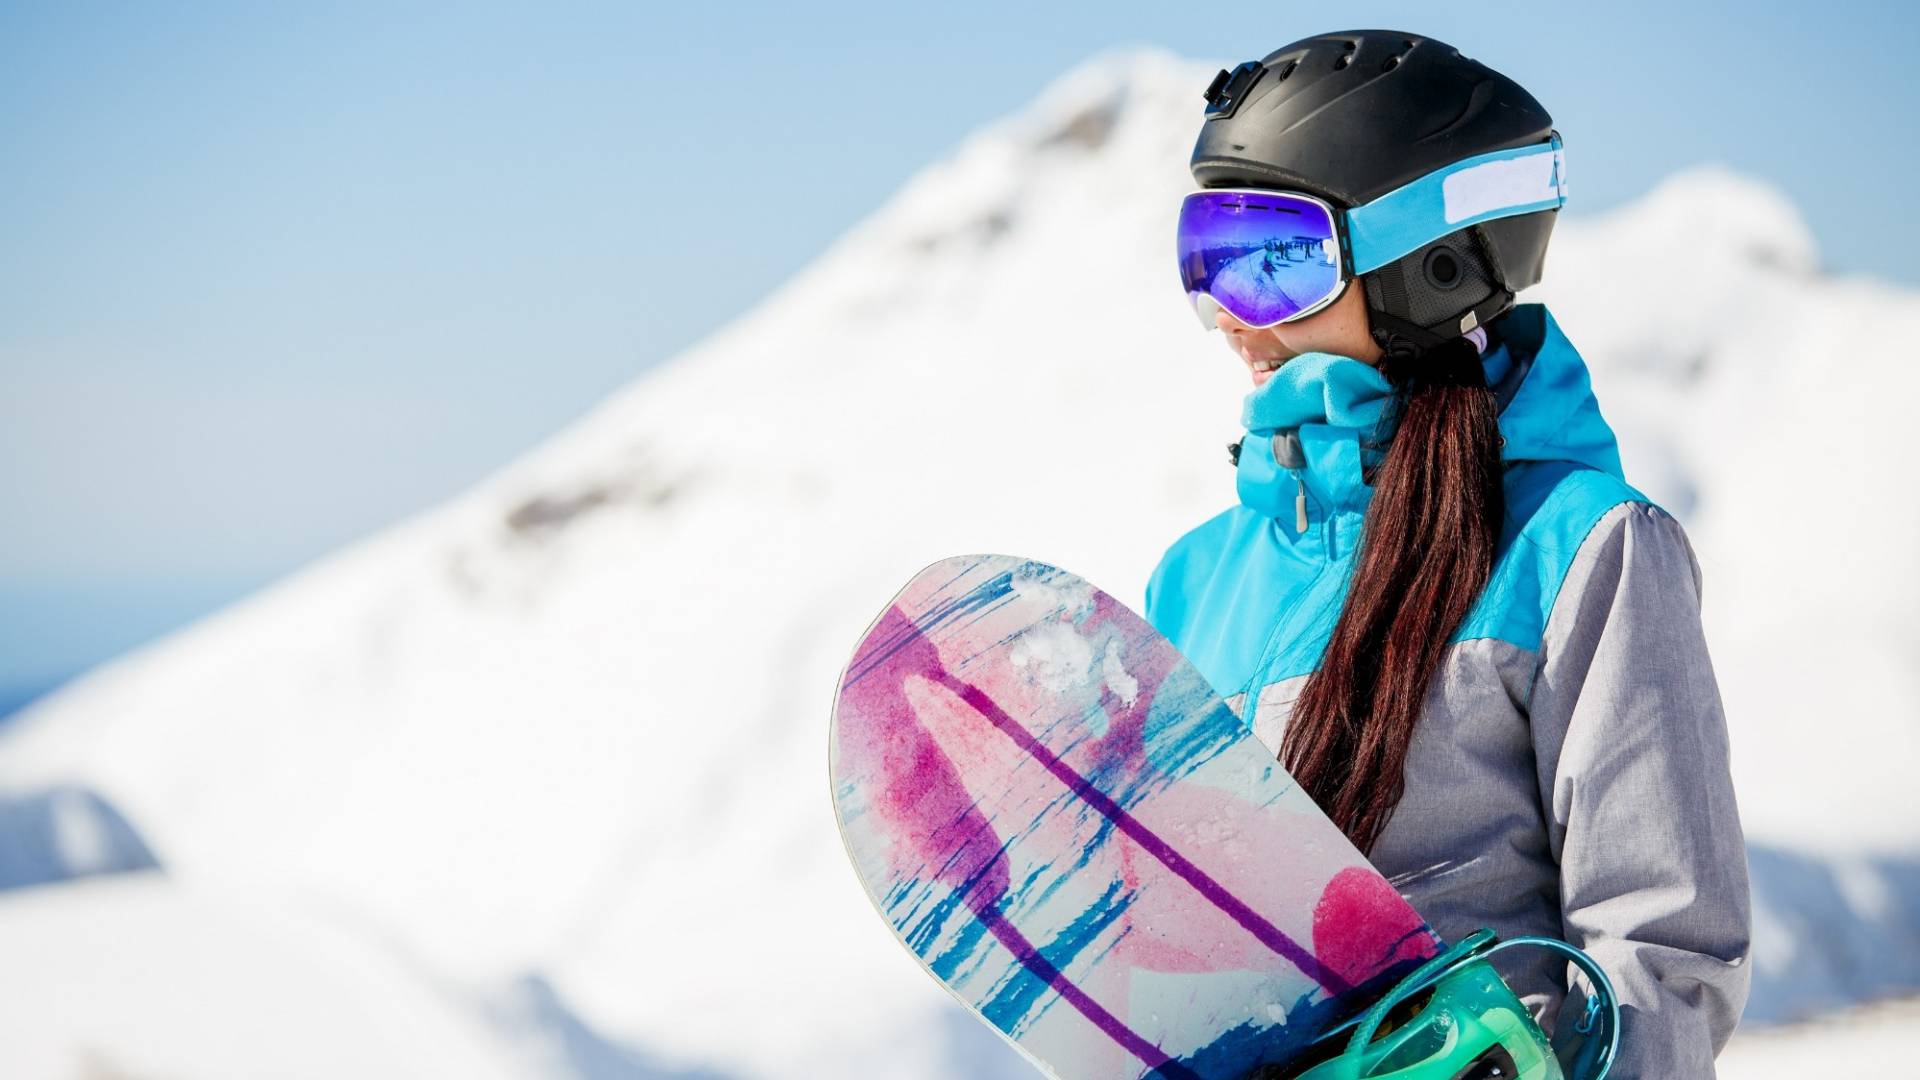 Photo of young woman tourist in helmet looking away with snowboard in hands against background of snow mountains